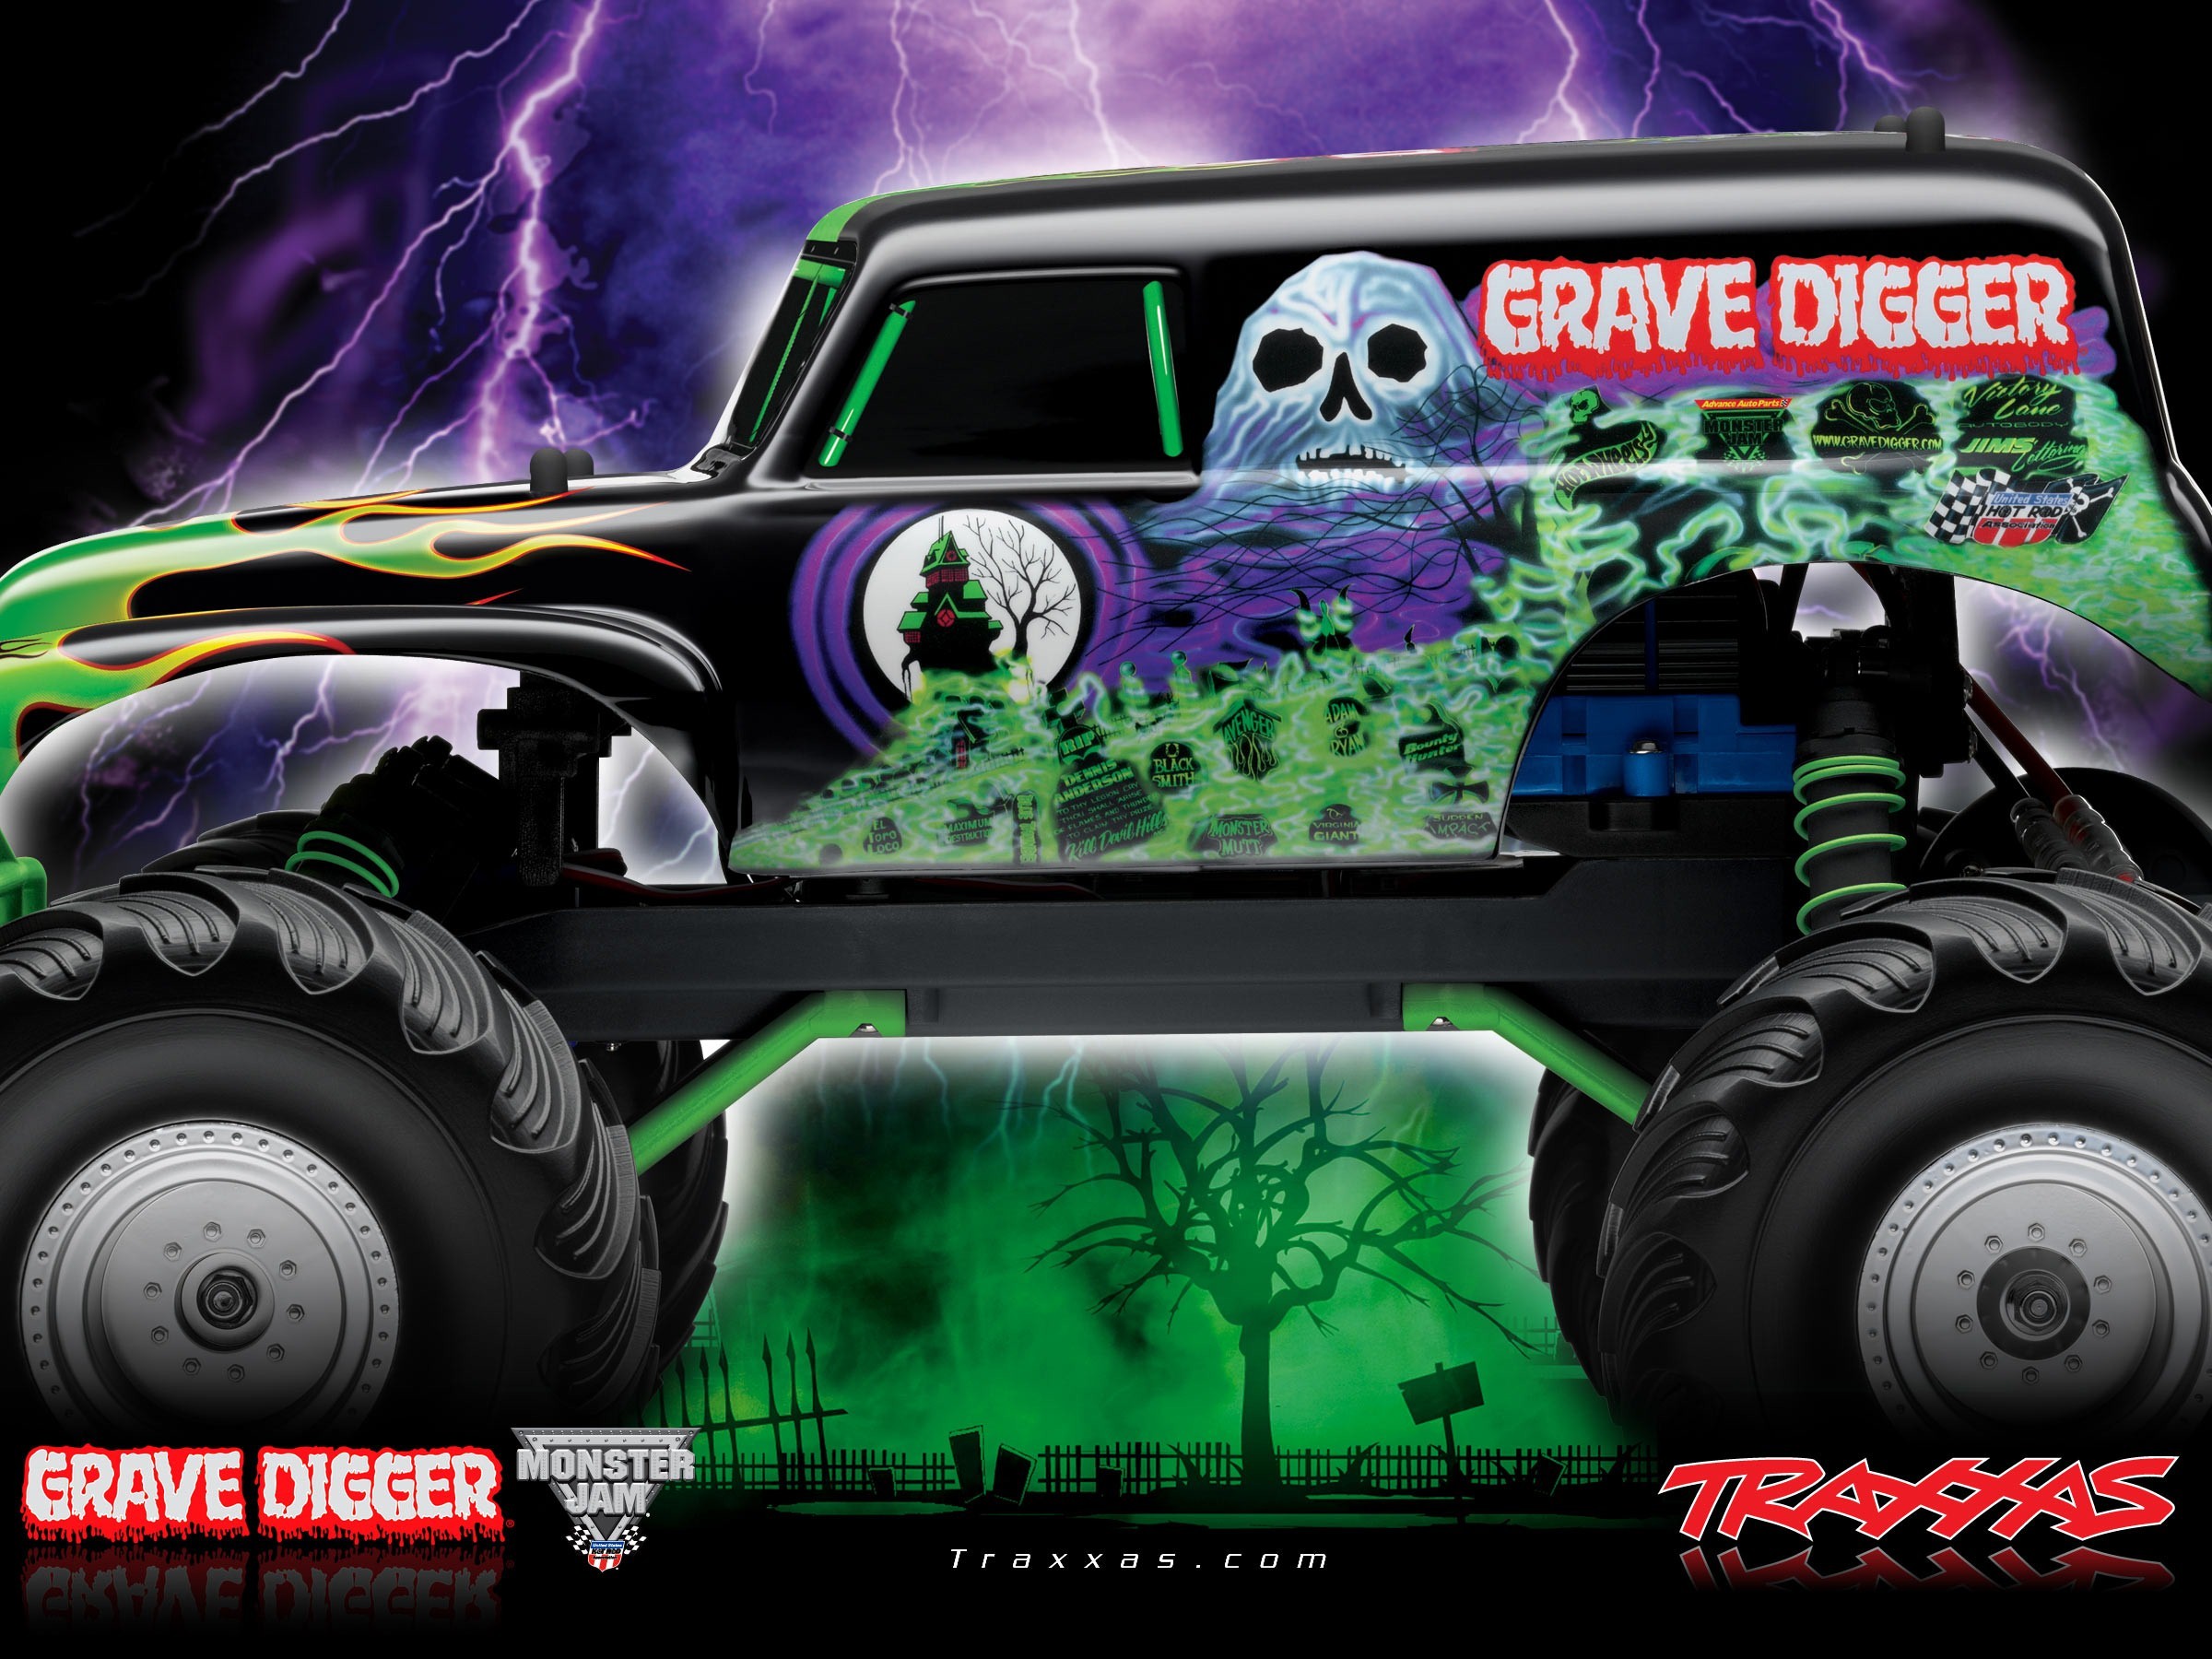 2400x1800 pin Drawn truck grave digger monster truck #3